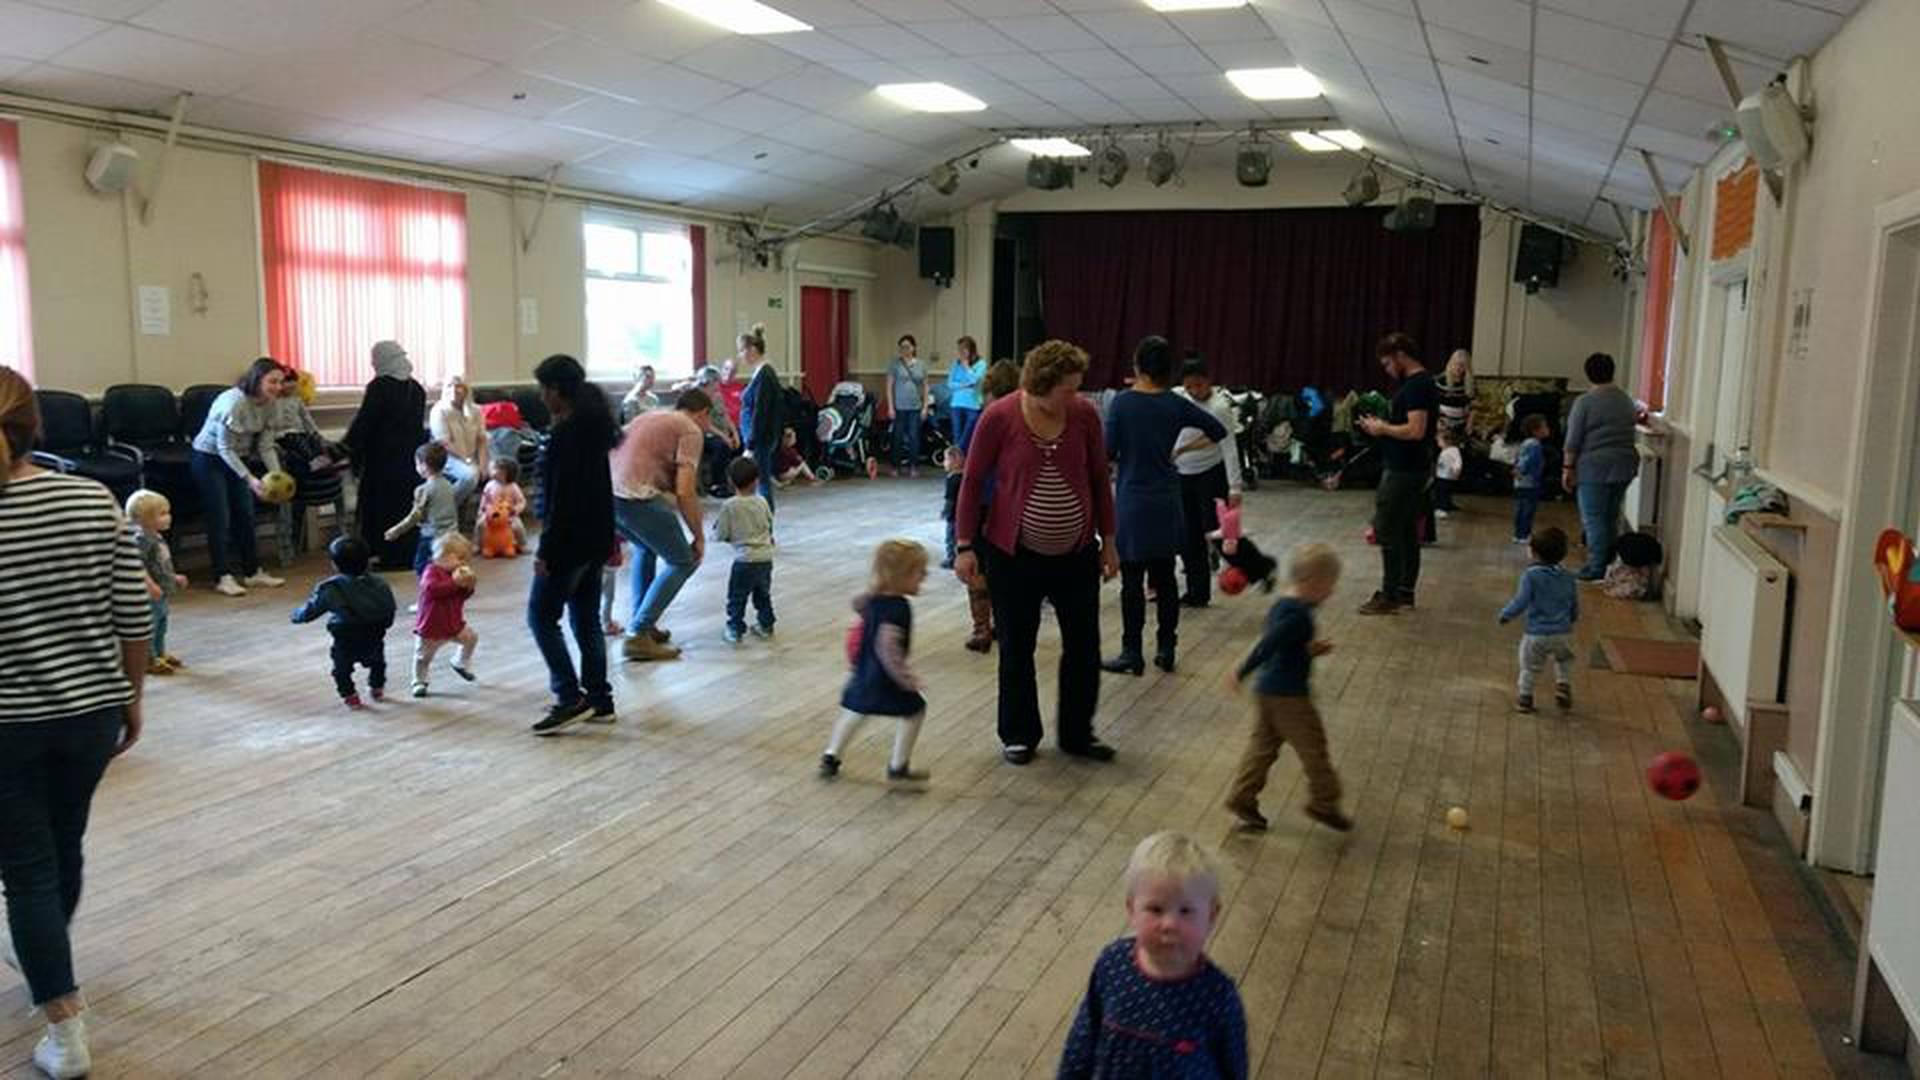 St Stephens Playgroup, Welling photo